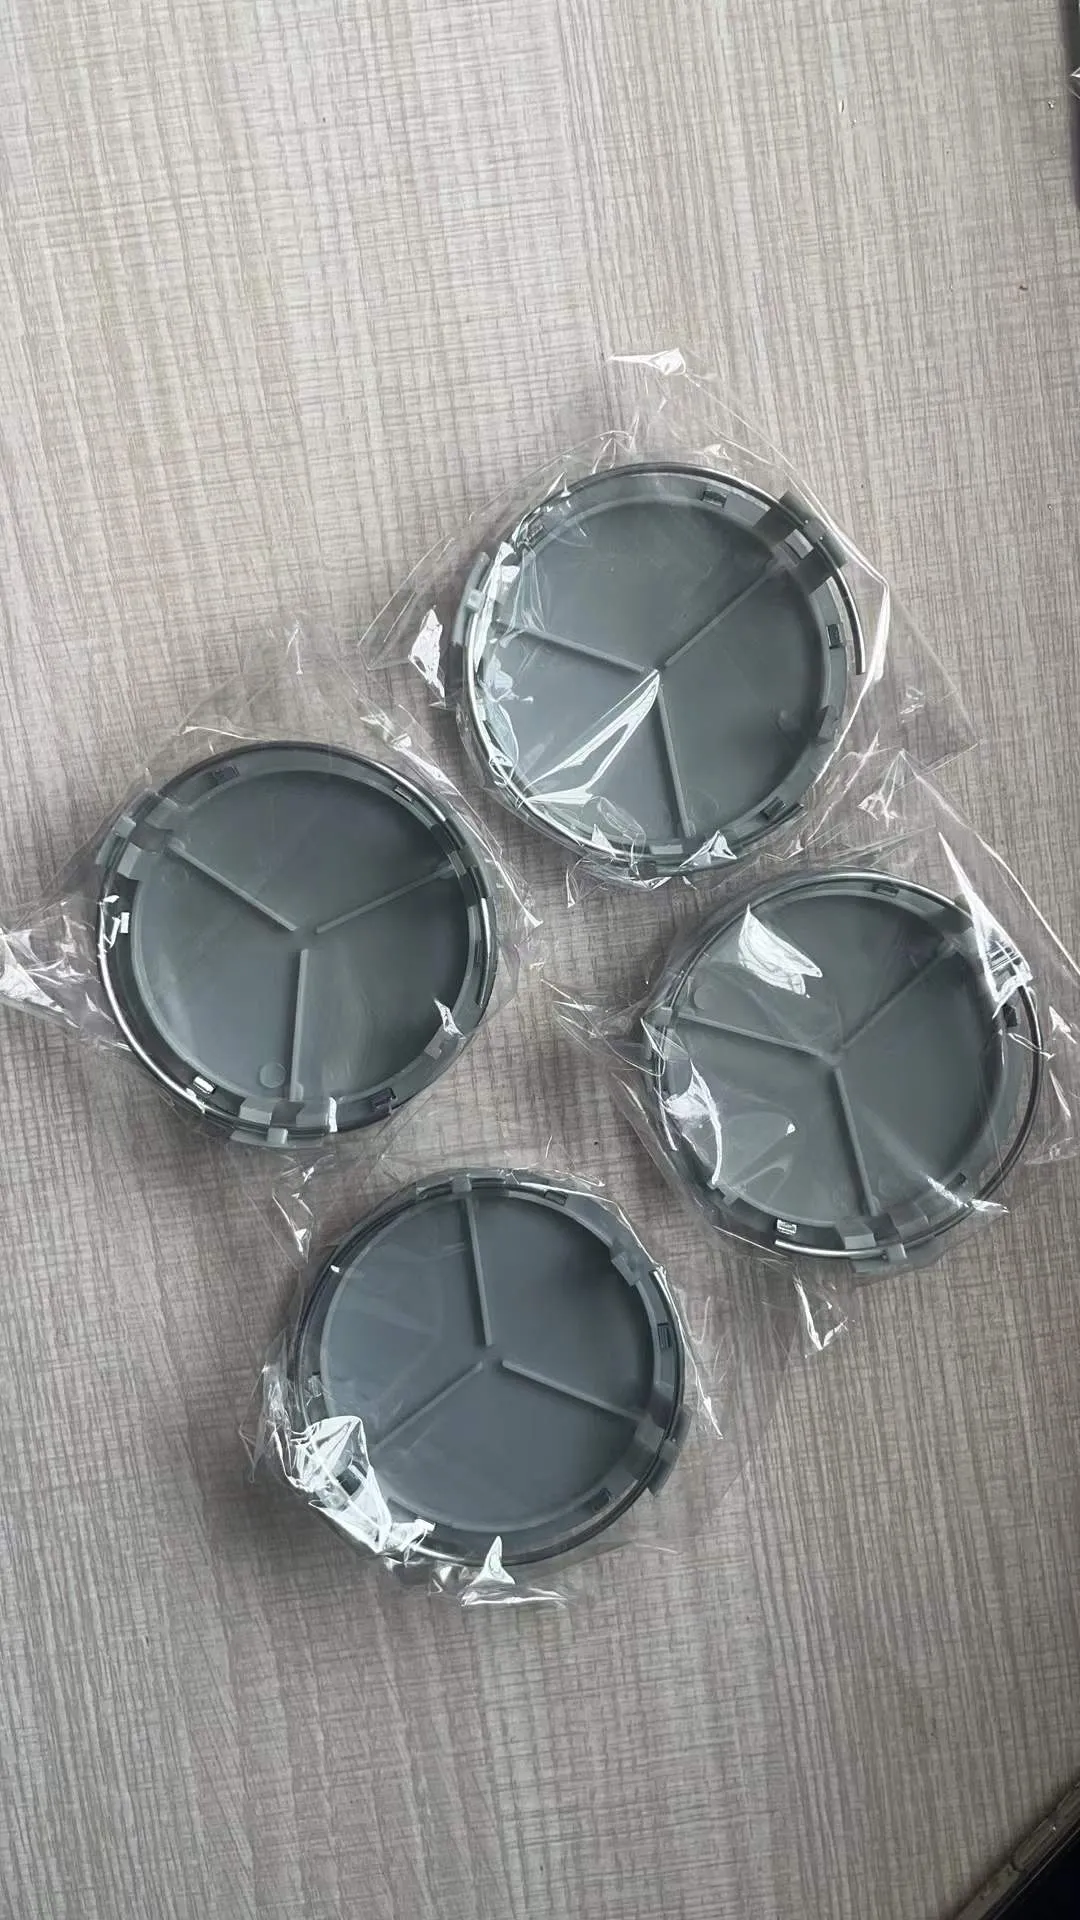 100pcs / lot 75mm Silver Star Car Stadges Express Excessories Cyling Center Center Cap for W212 W211 W210 W205 CLA GLC C200 Accessories